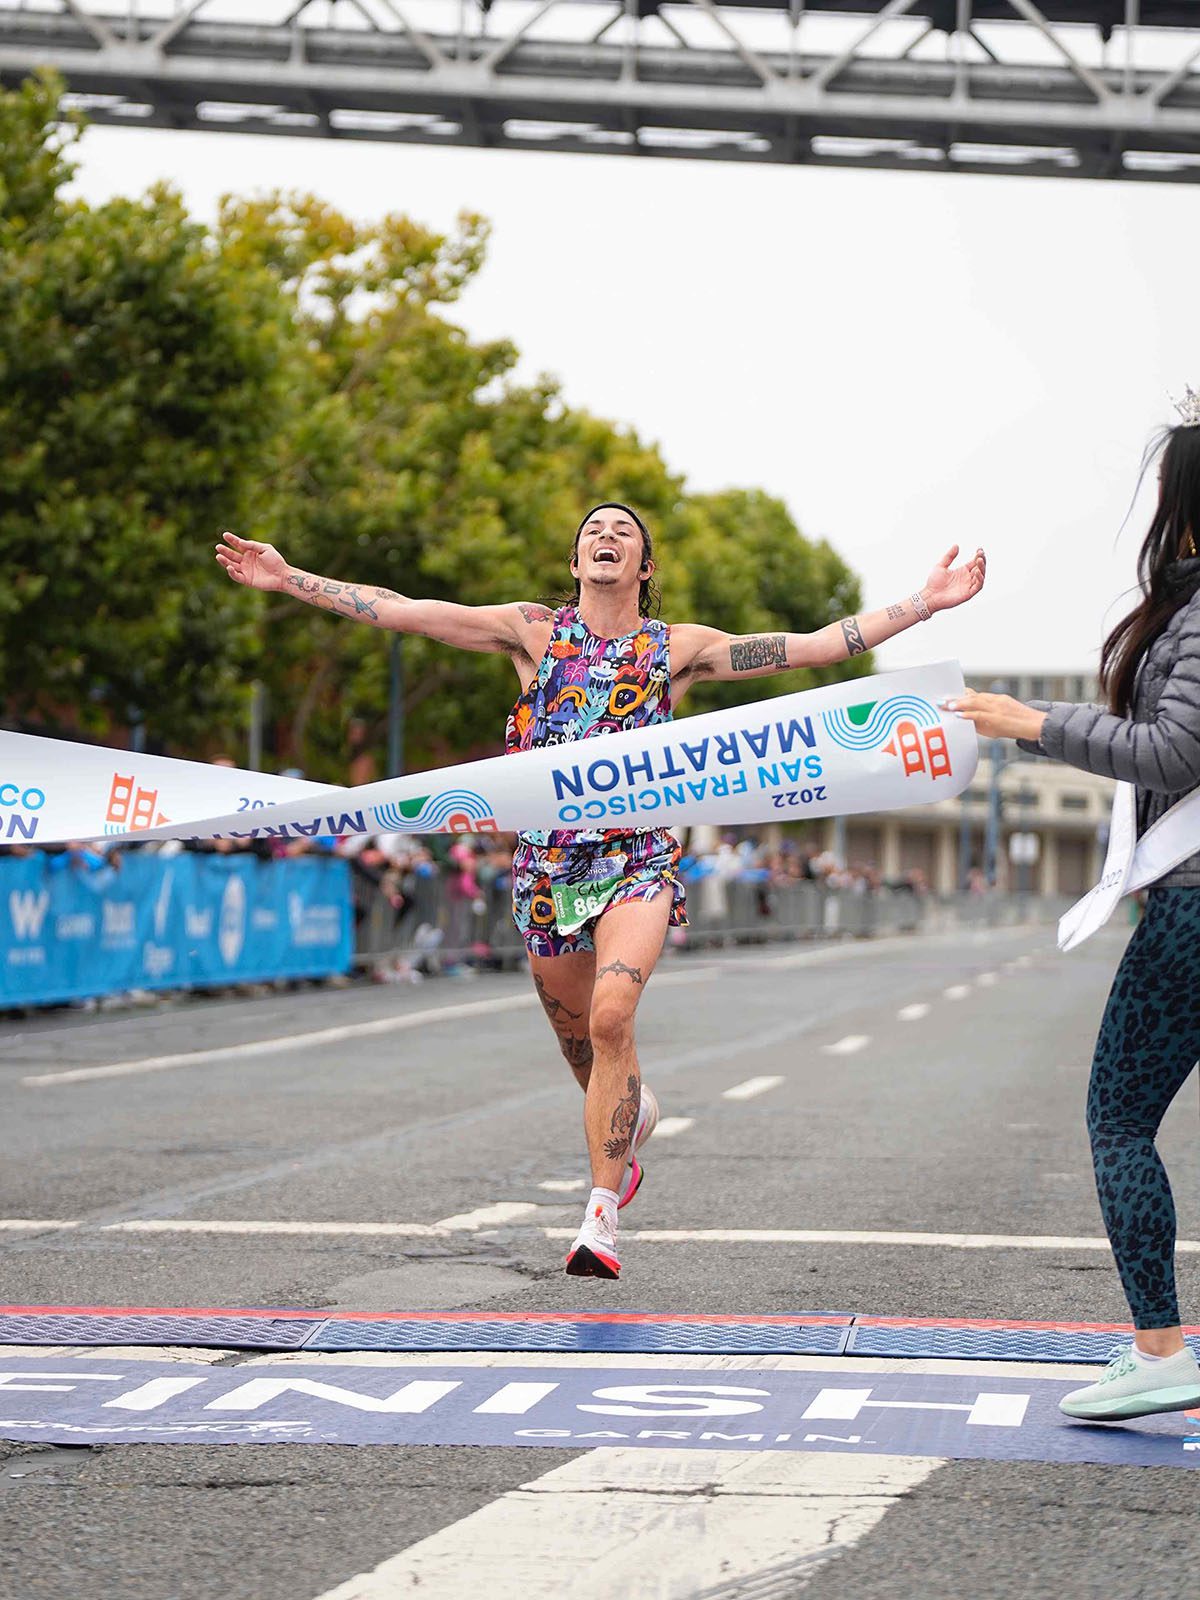 Cal Calamia, in colorful running gear, crosses the finish line at the San Francisco Marathon